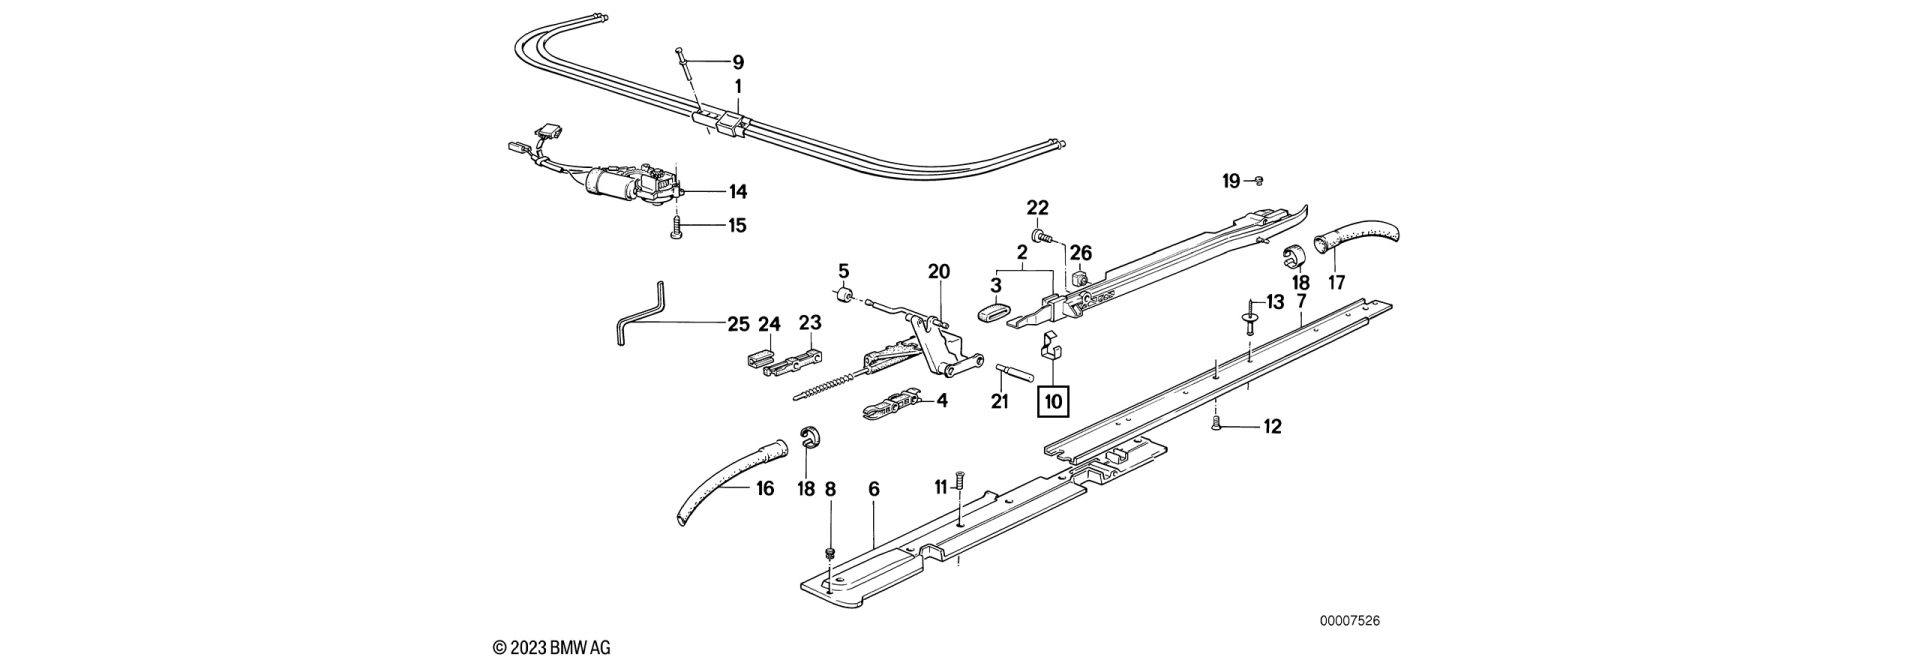 Clamp for sunroof baffle exploded-view drawing